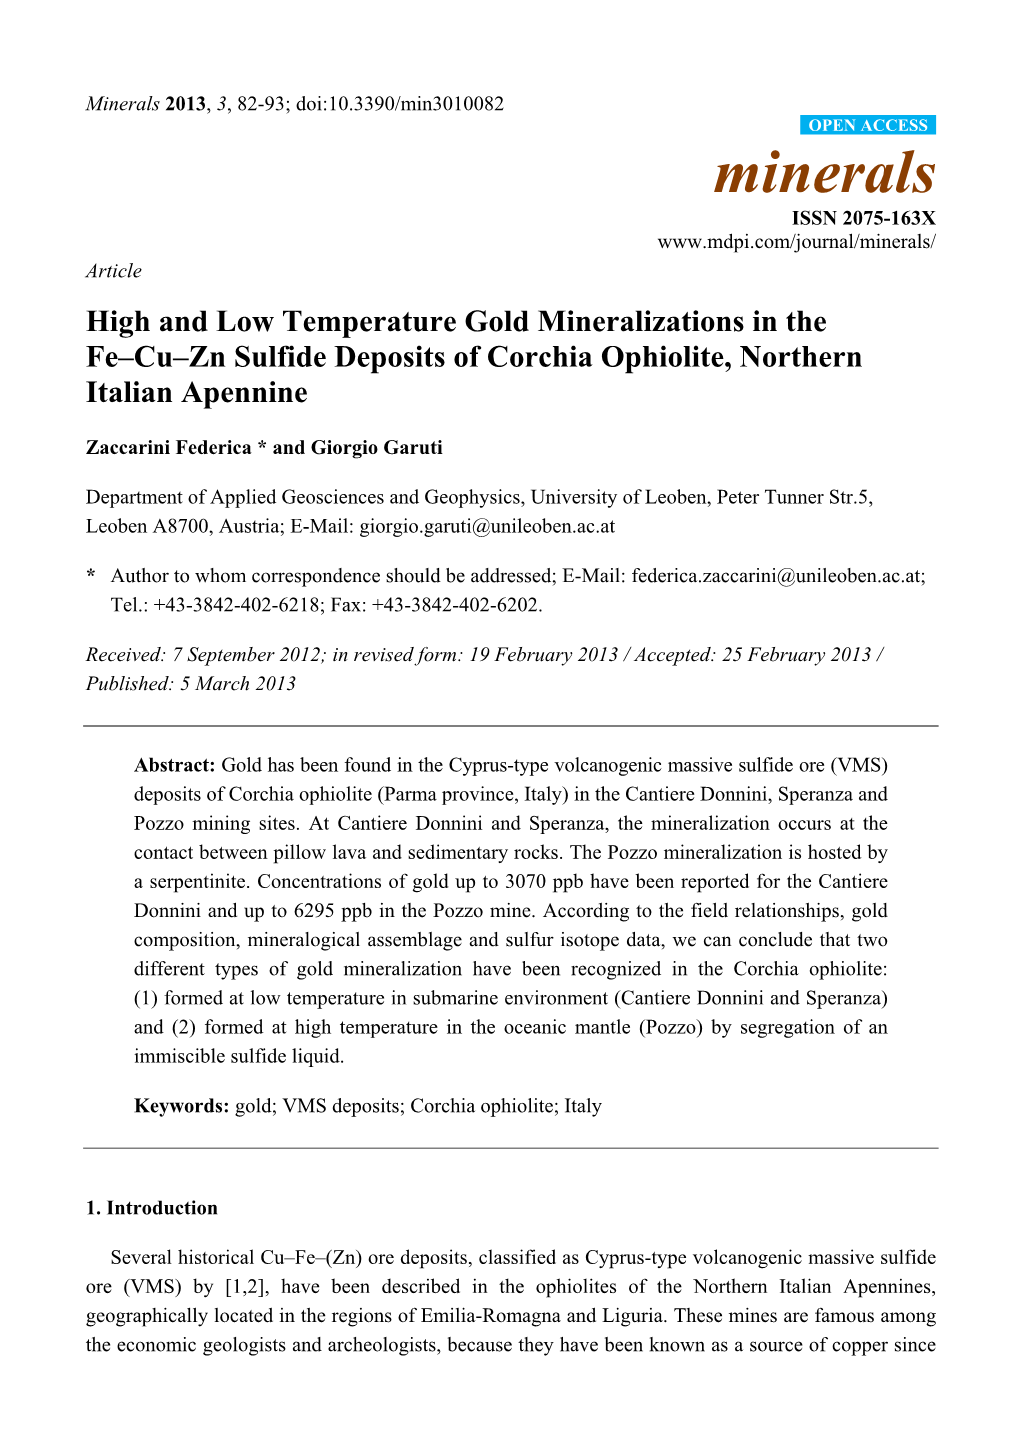 High and Low Temperature Gold Mineralizations in the Fe–Cu–Zn Sulfide Deposits of Corchia Ophiolite, Northern Italian Apennine